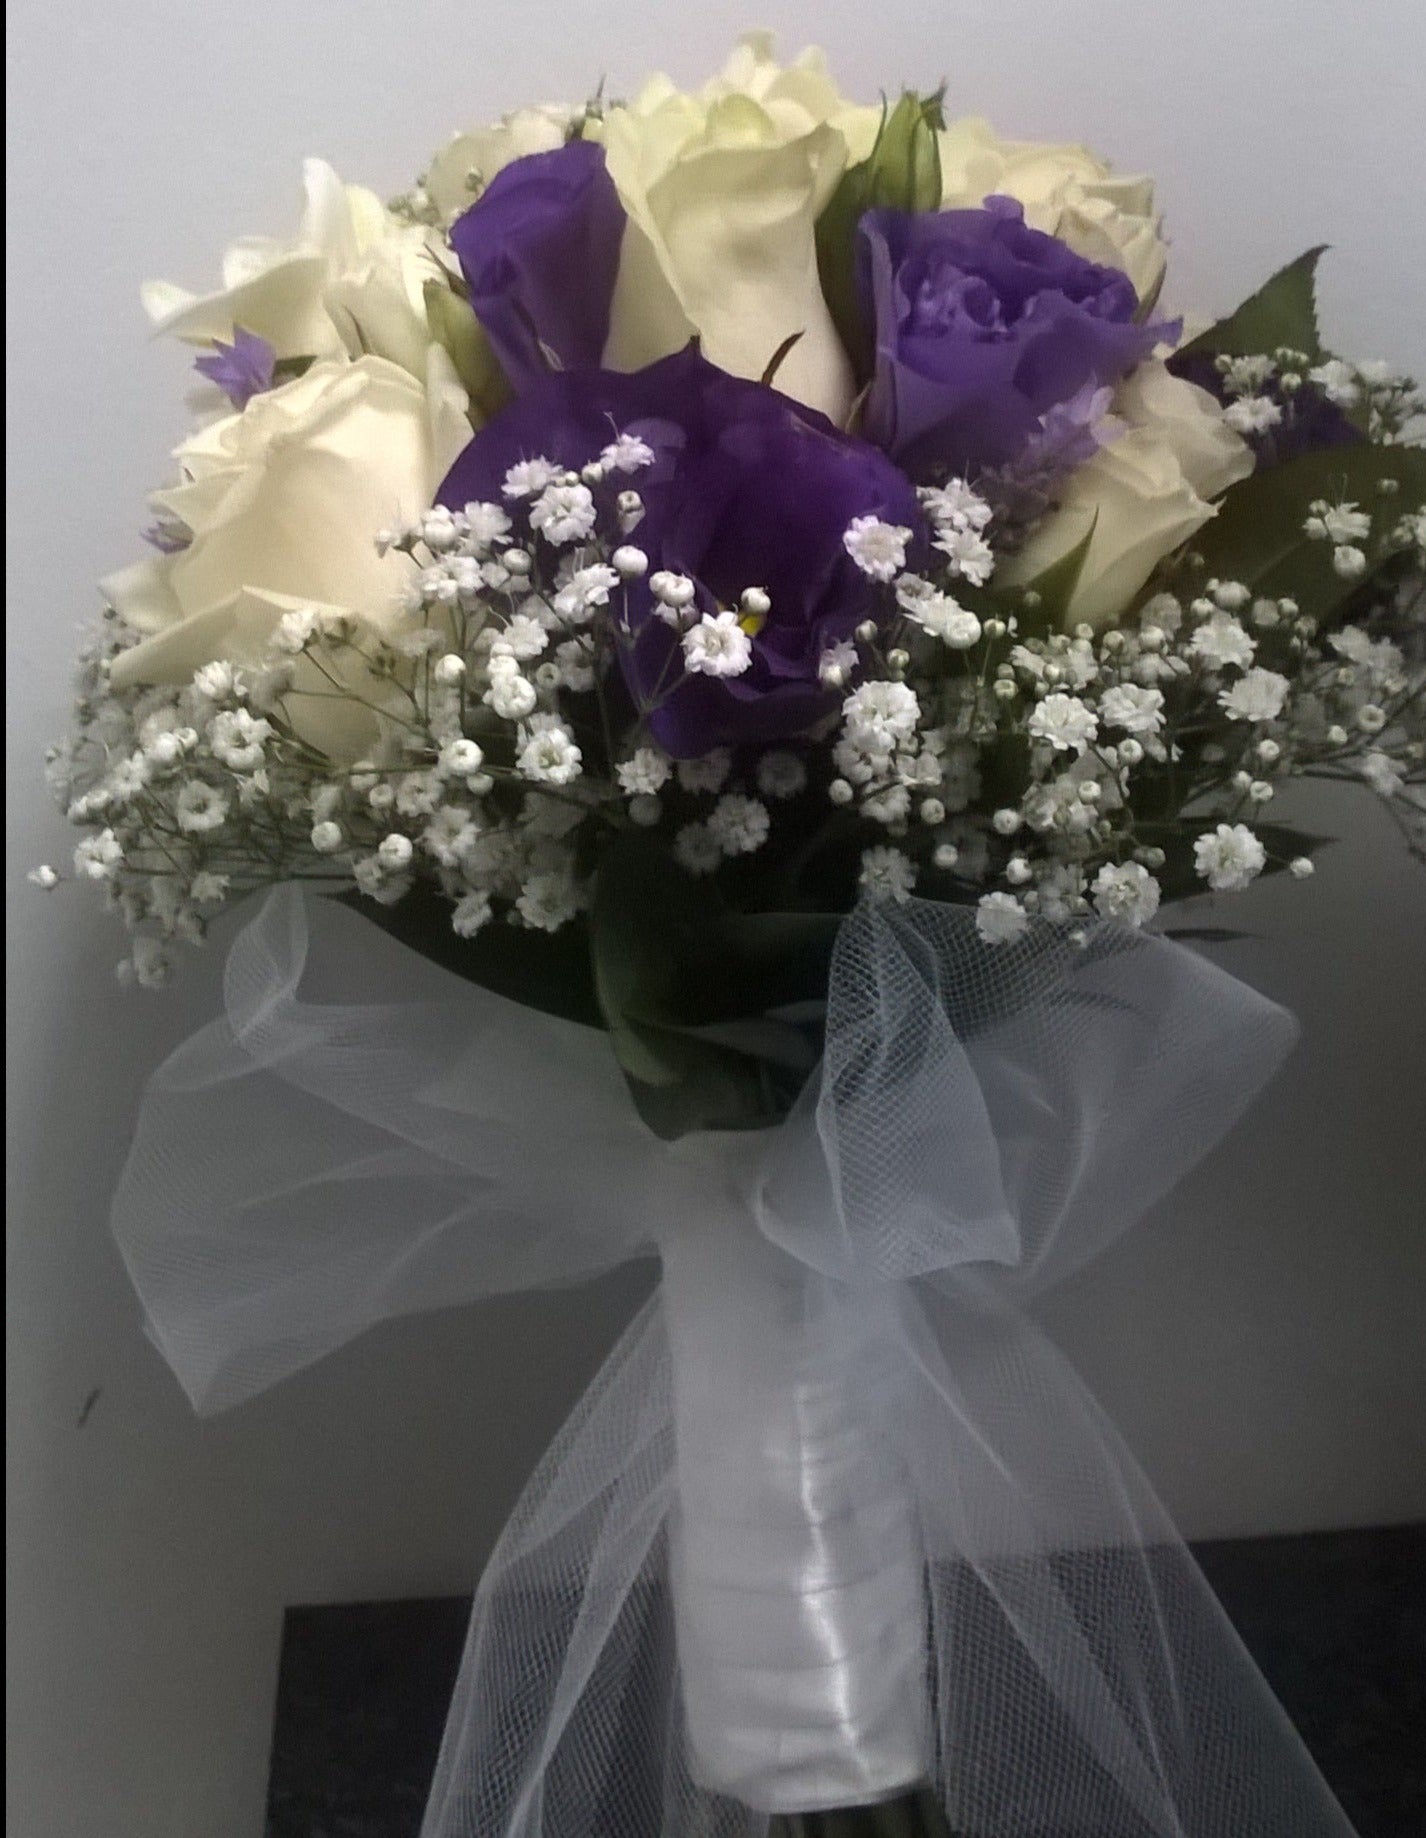 Bridal bouquet made with white roses, blue anenome, gypsophila and tied with a white satin ribbon with a tulle bow